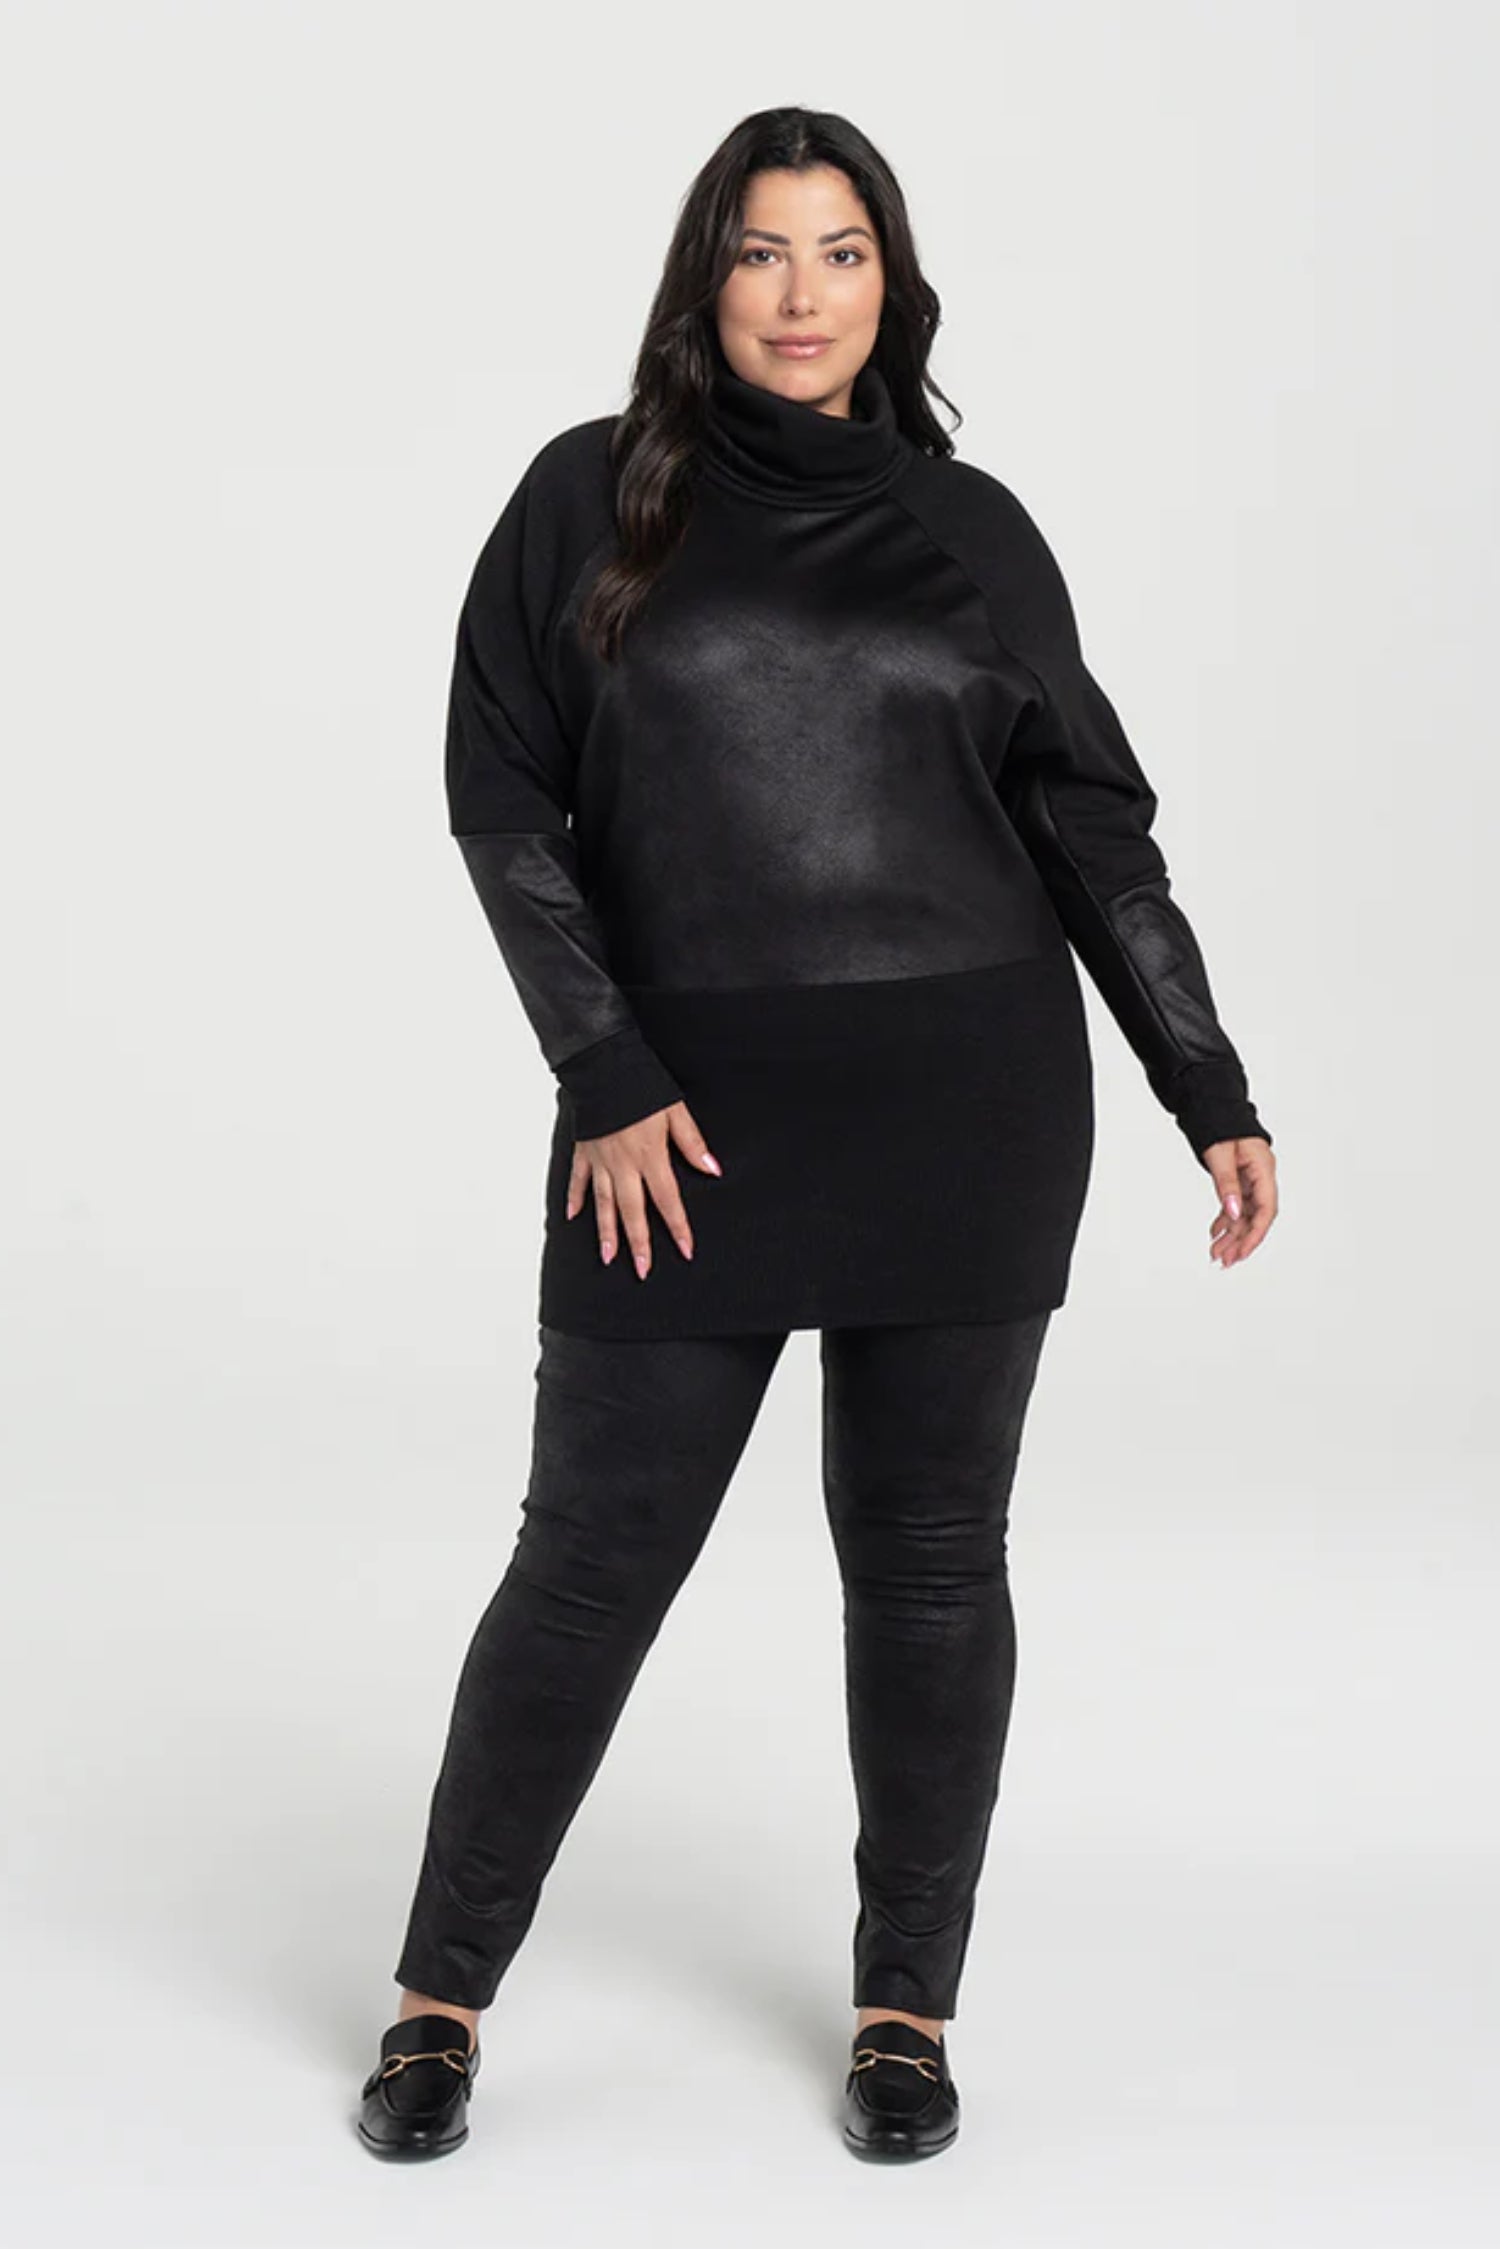 Helsing Tunic by Kollontai, Black, knit, faux leather insets, cowl neck, raglan sleeve, sizes XS to XXL, made in Montreal